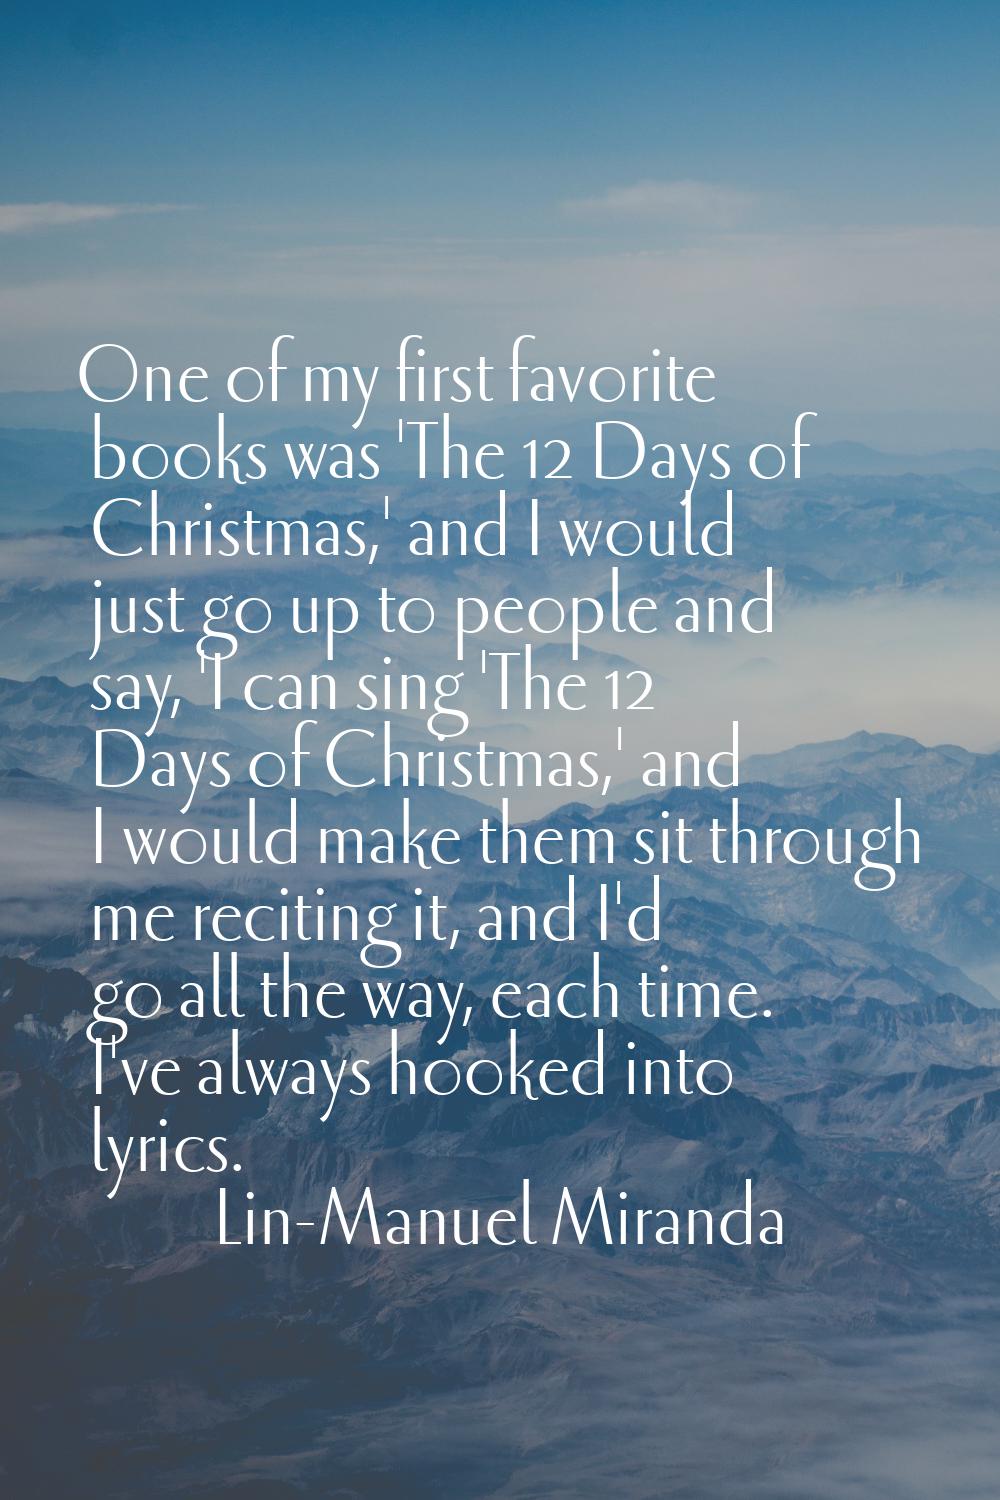 One of my first favorite books was 'The 12 Days of Christmas,' and I would just go up to people and